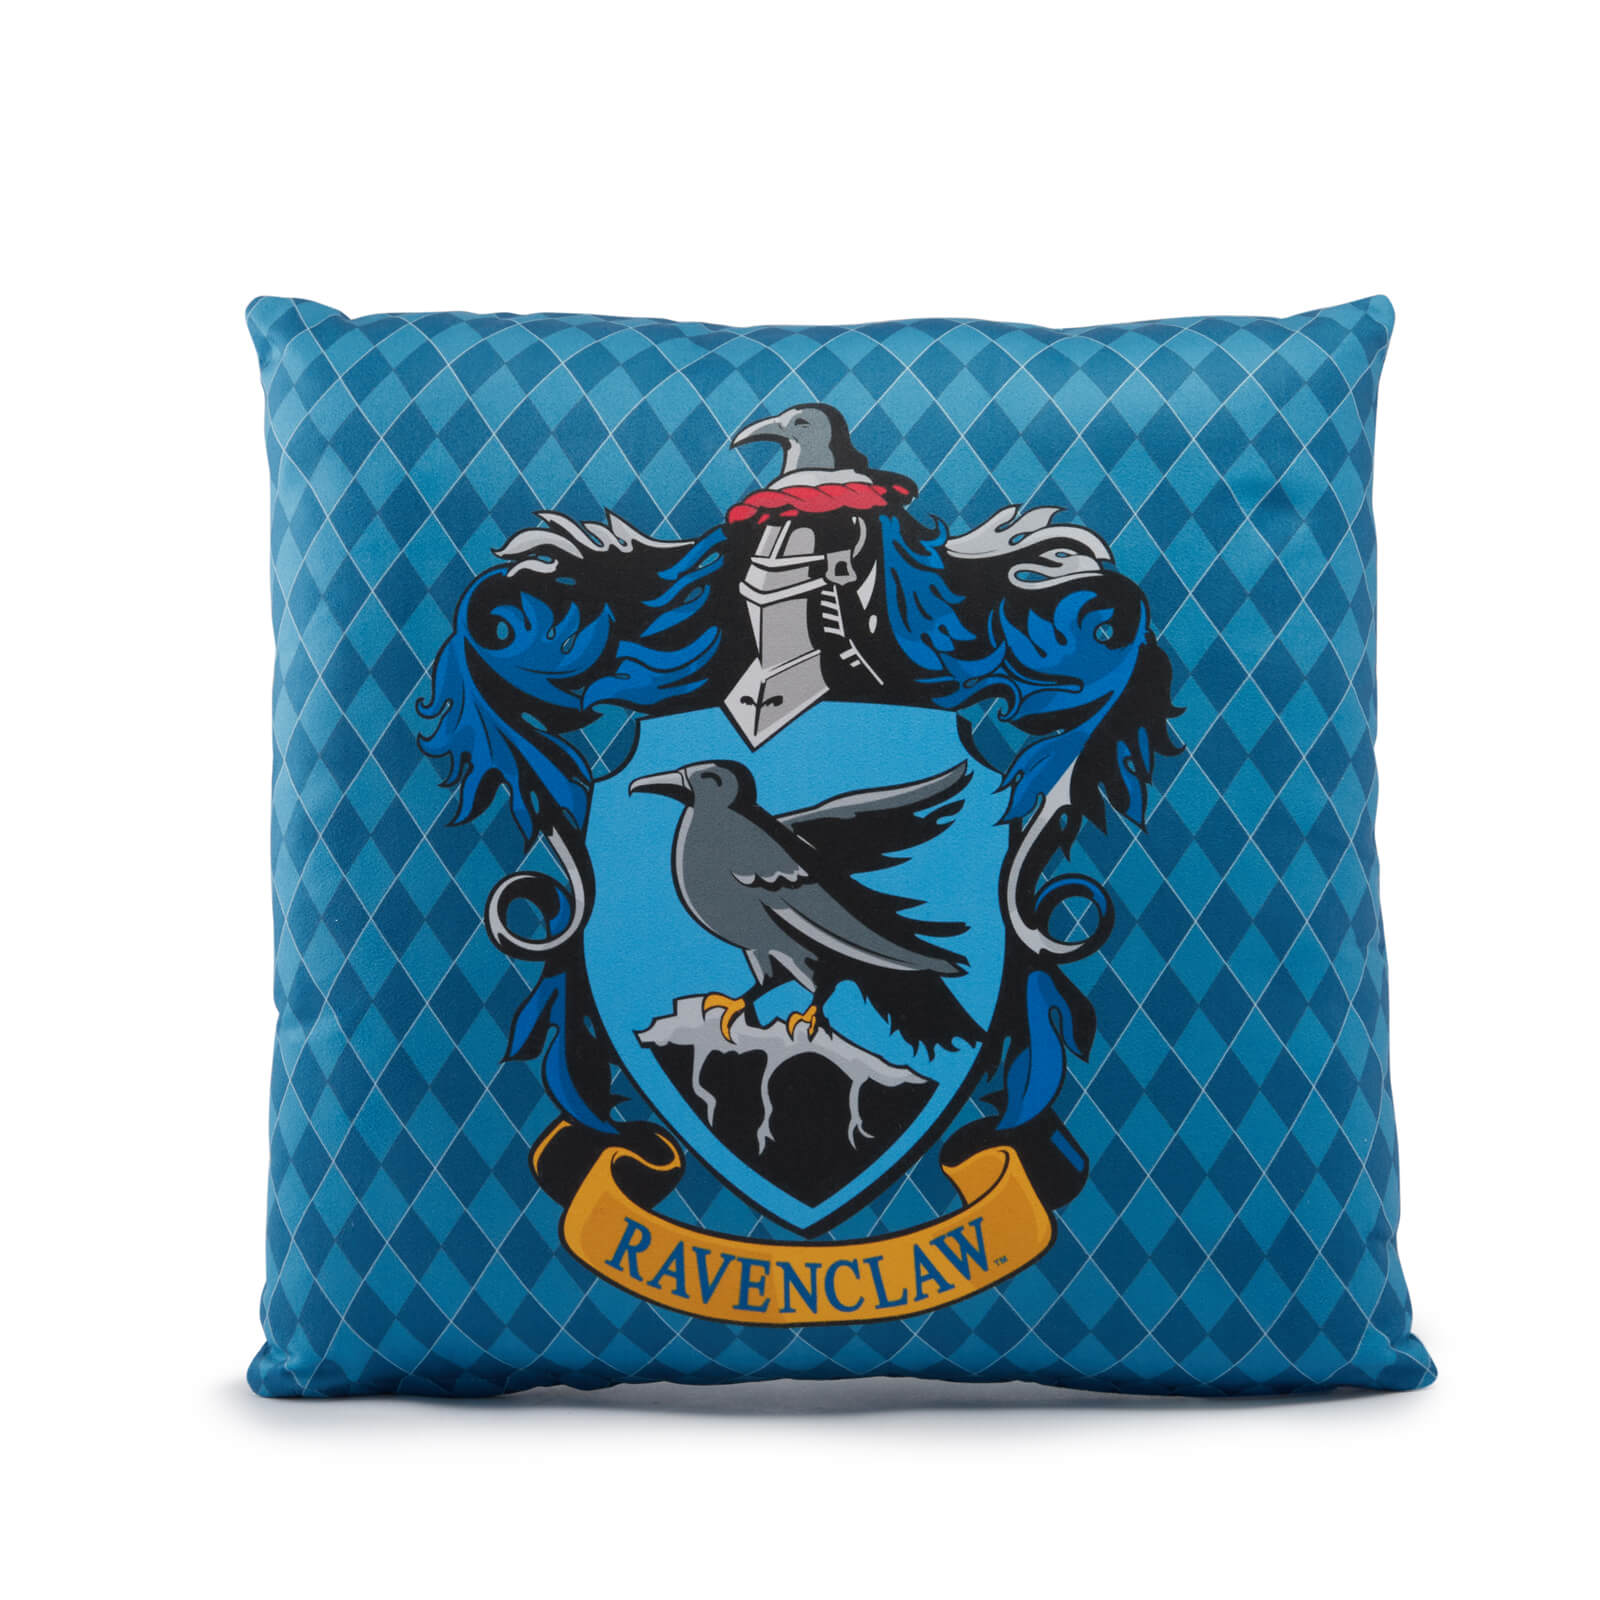 Harry Potter Ravenclaw Square Cushion - 50x50cm - Soft Touch